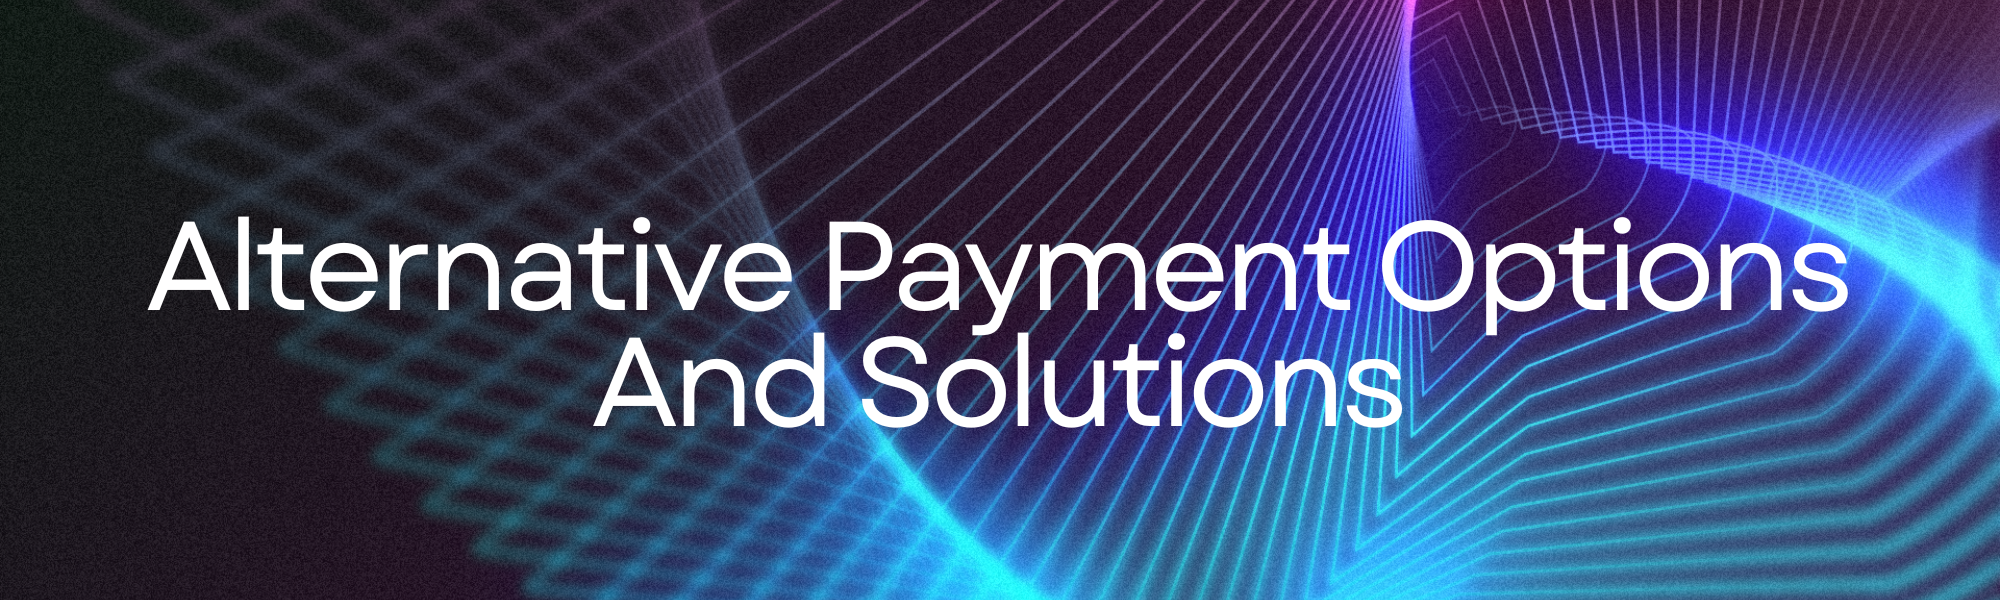 Alternative Payment Options And Solutions